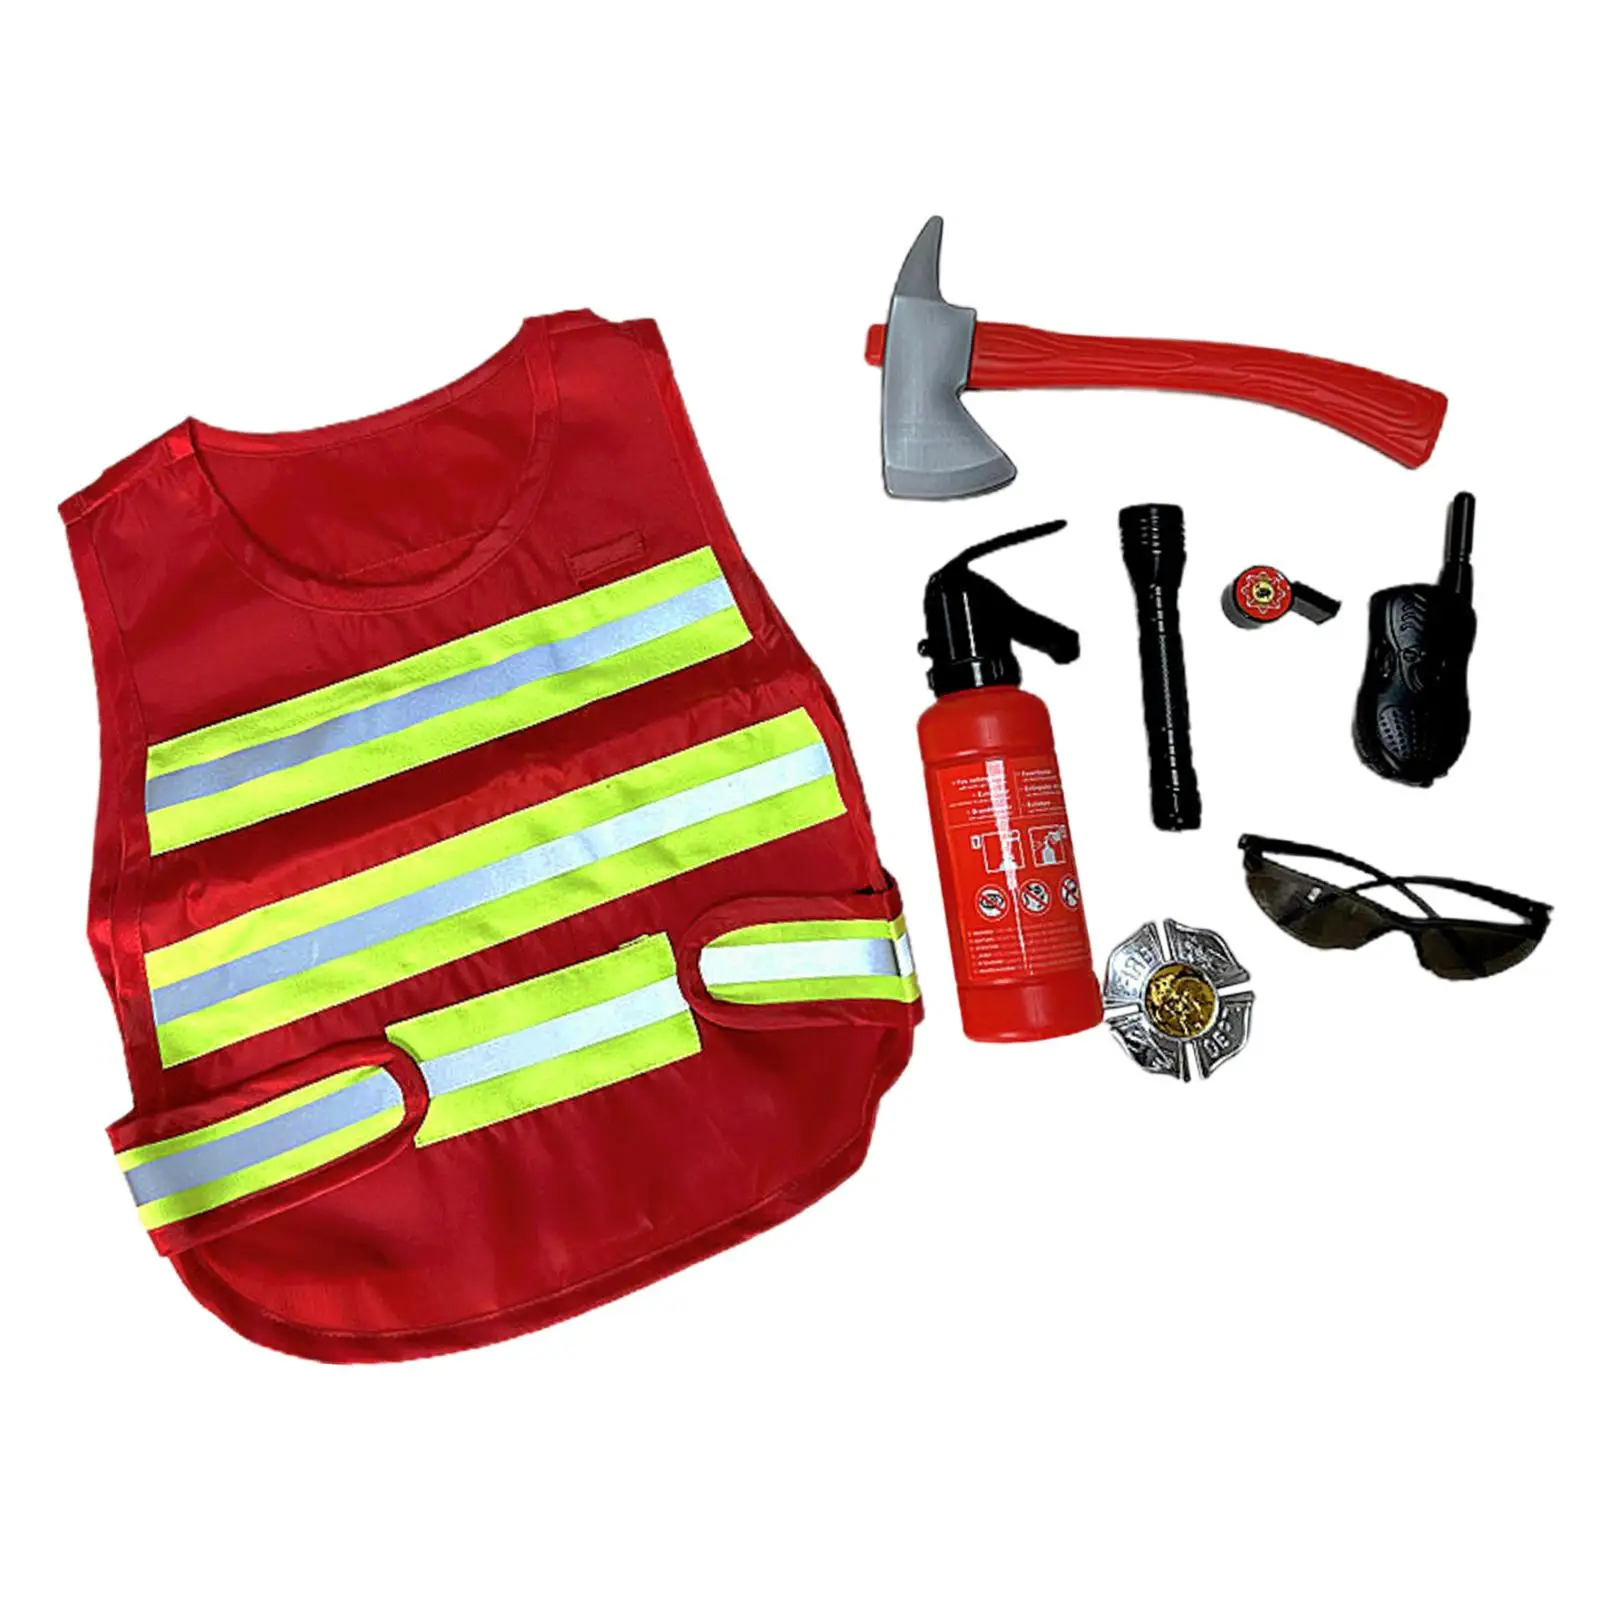 Kids Firefighter Costume Fireman Costume Dress up Birthday Favor Costume Pretend Play for Boys Kids Ages 3-7 Girls Gifts